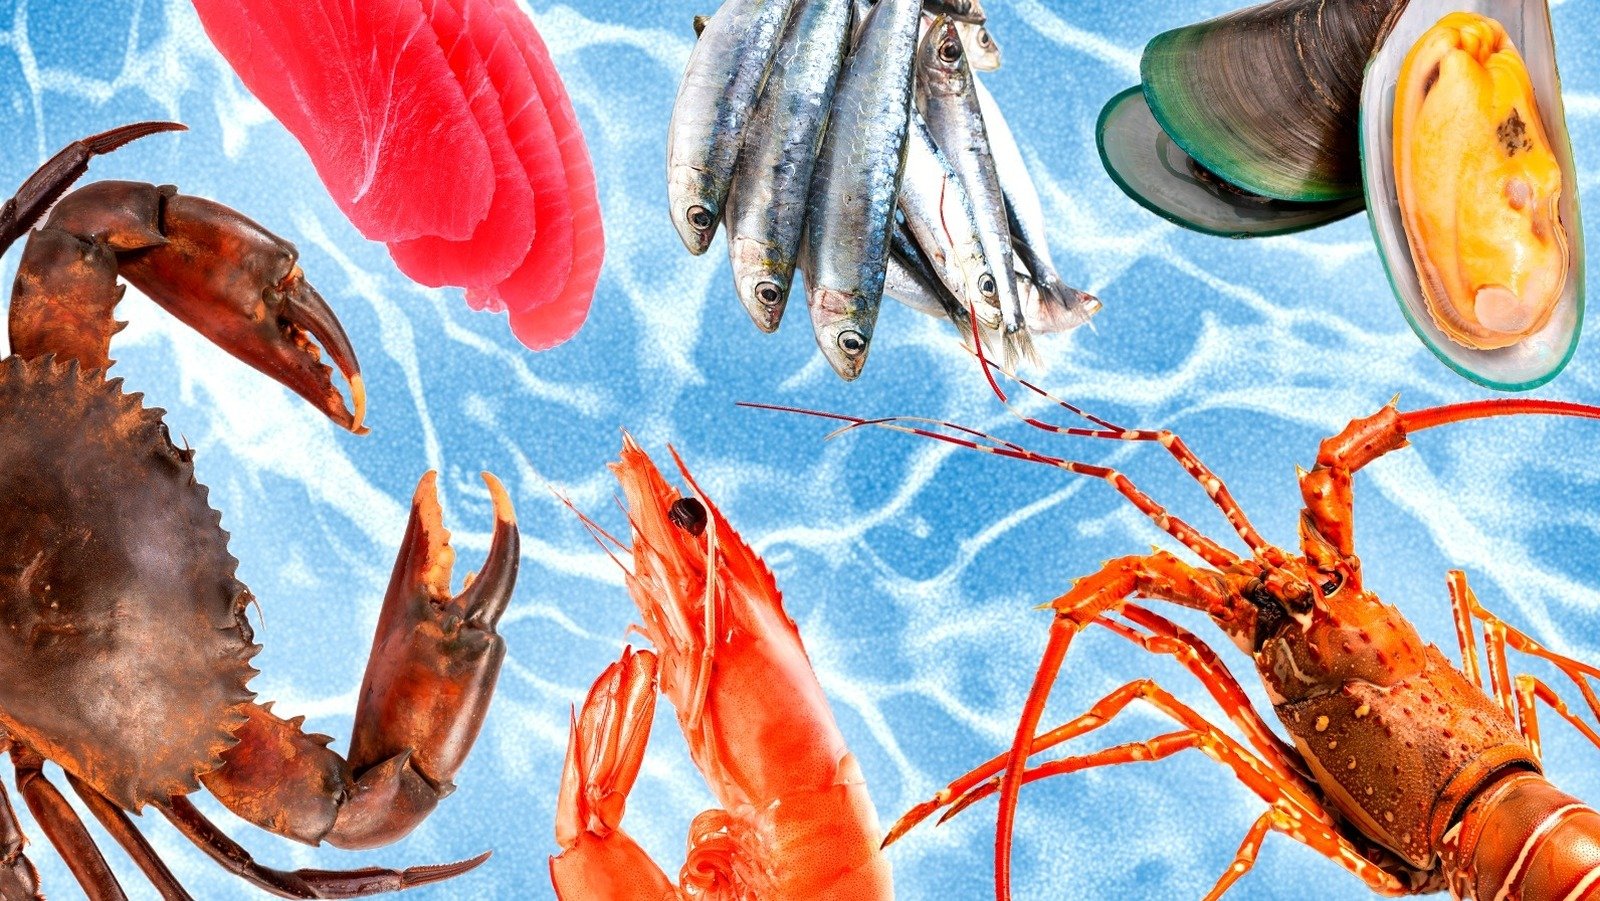 20 Popular Types Of Seafood, Ranked